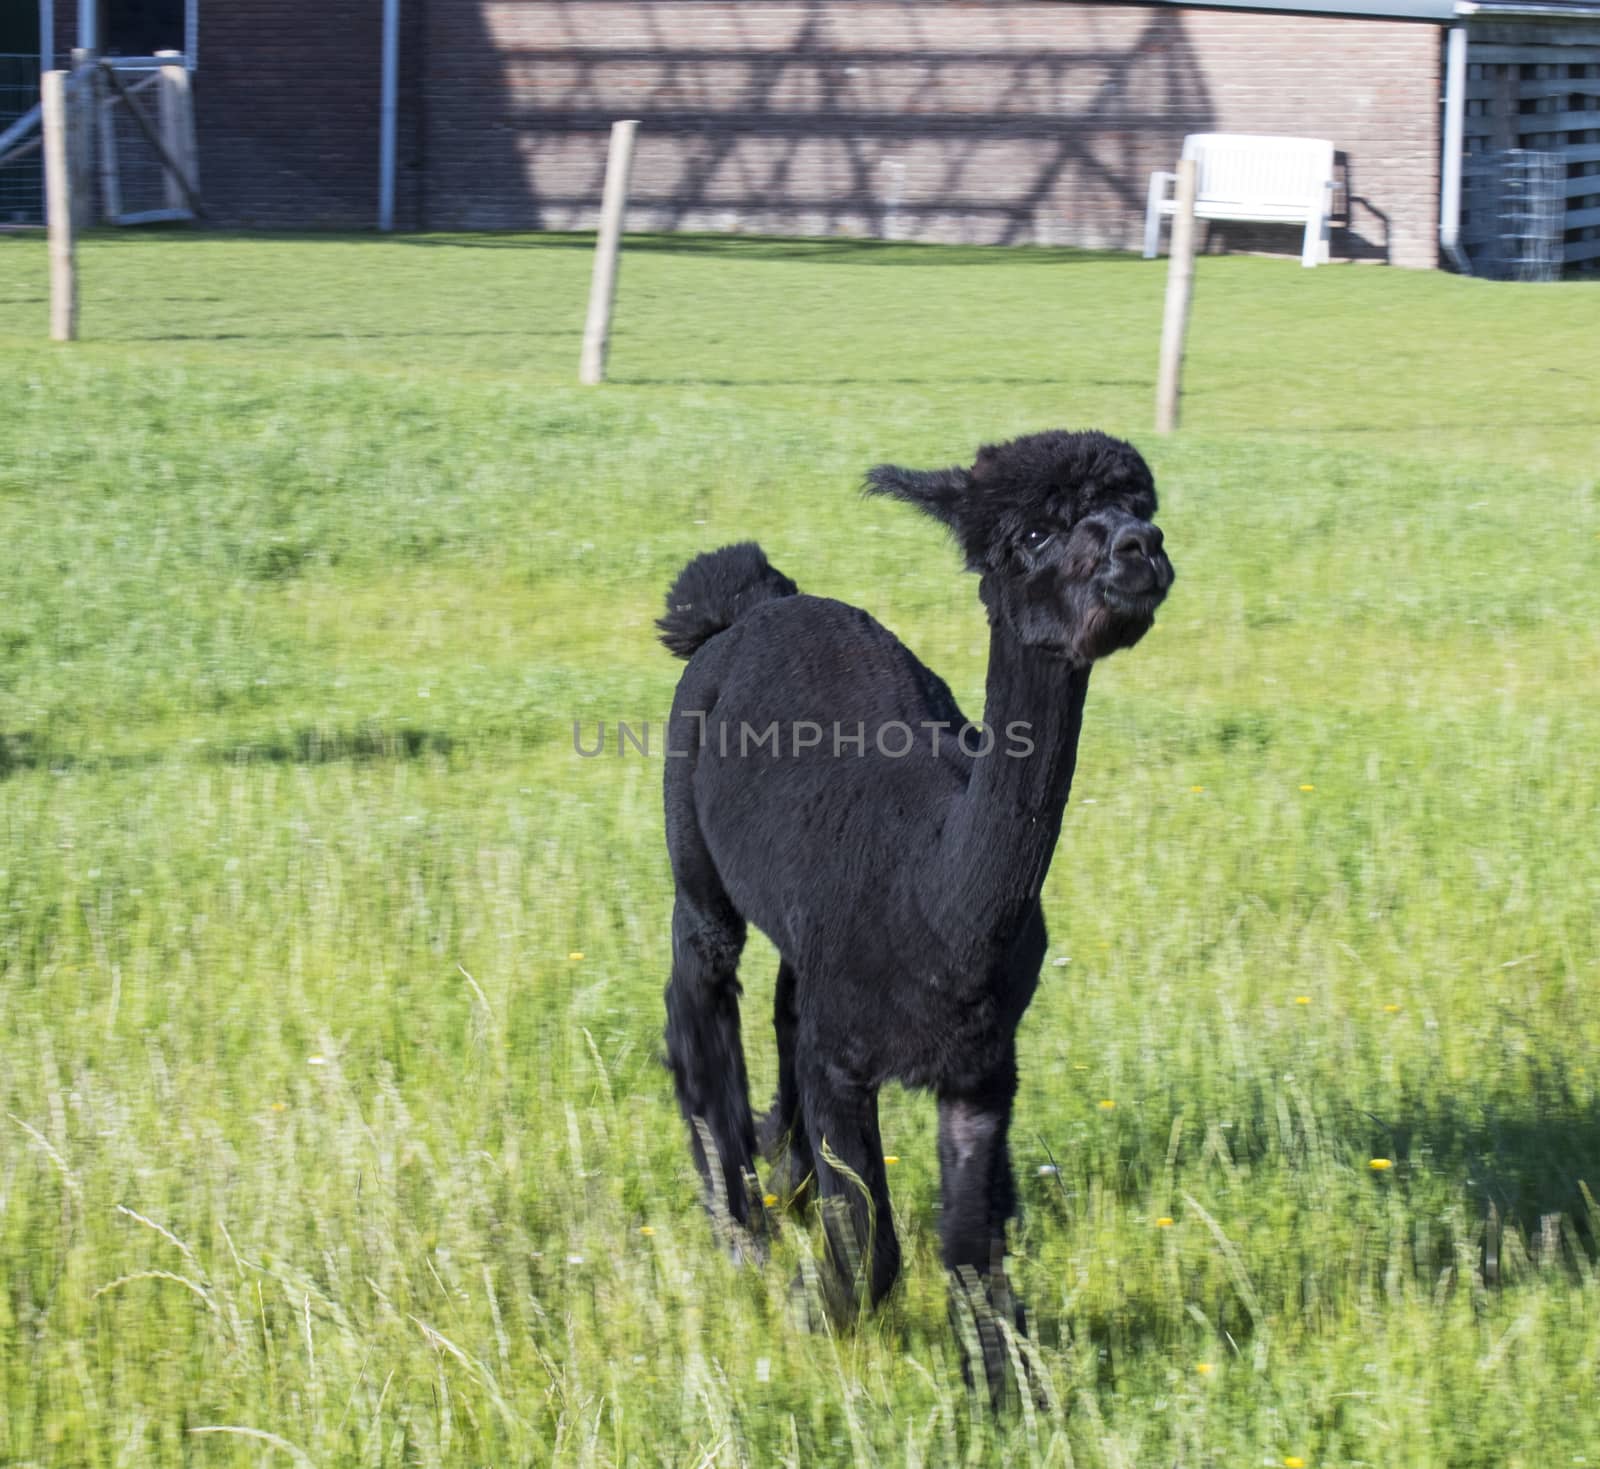 Black alpaca standing in a field with some bricks and posts in the background wich u can cut away by resizing the image if needed